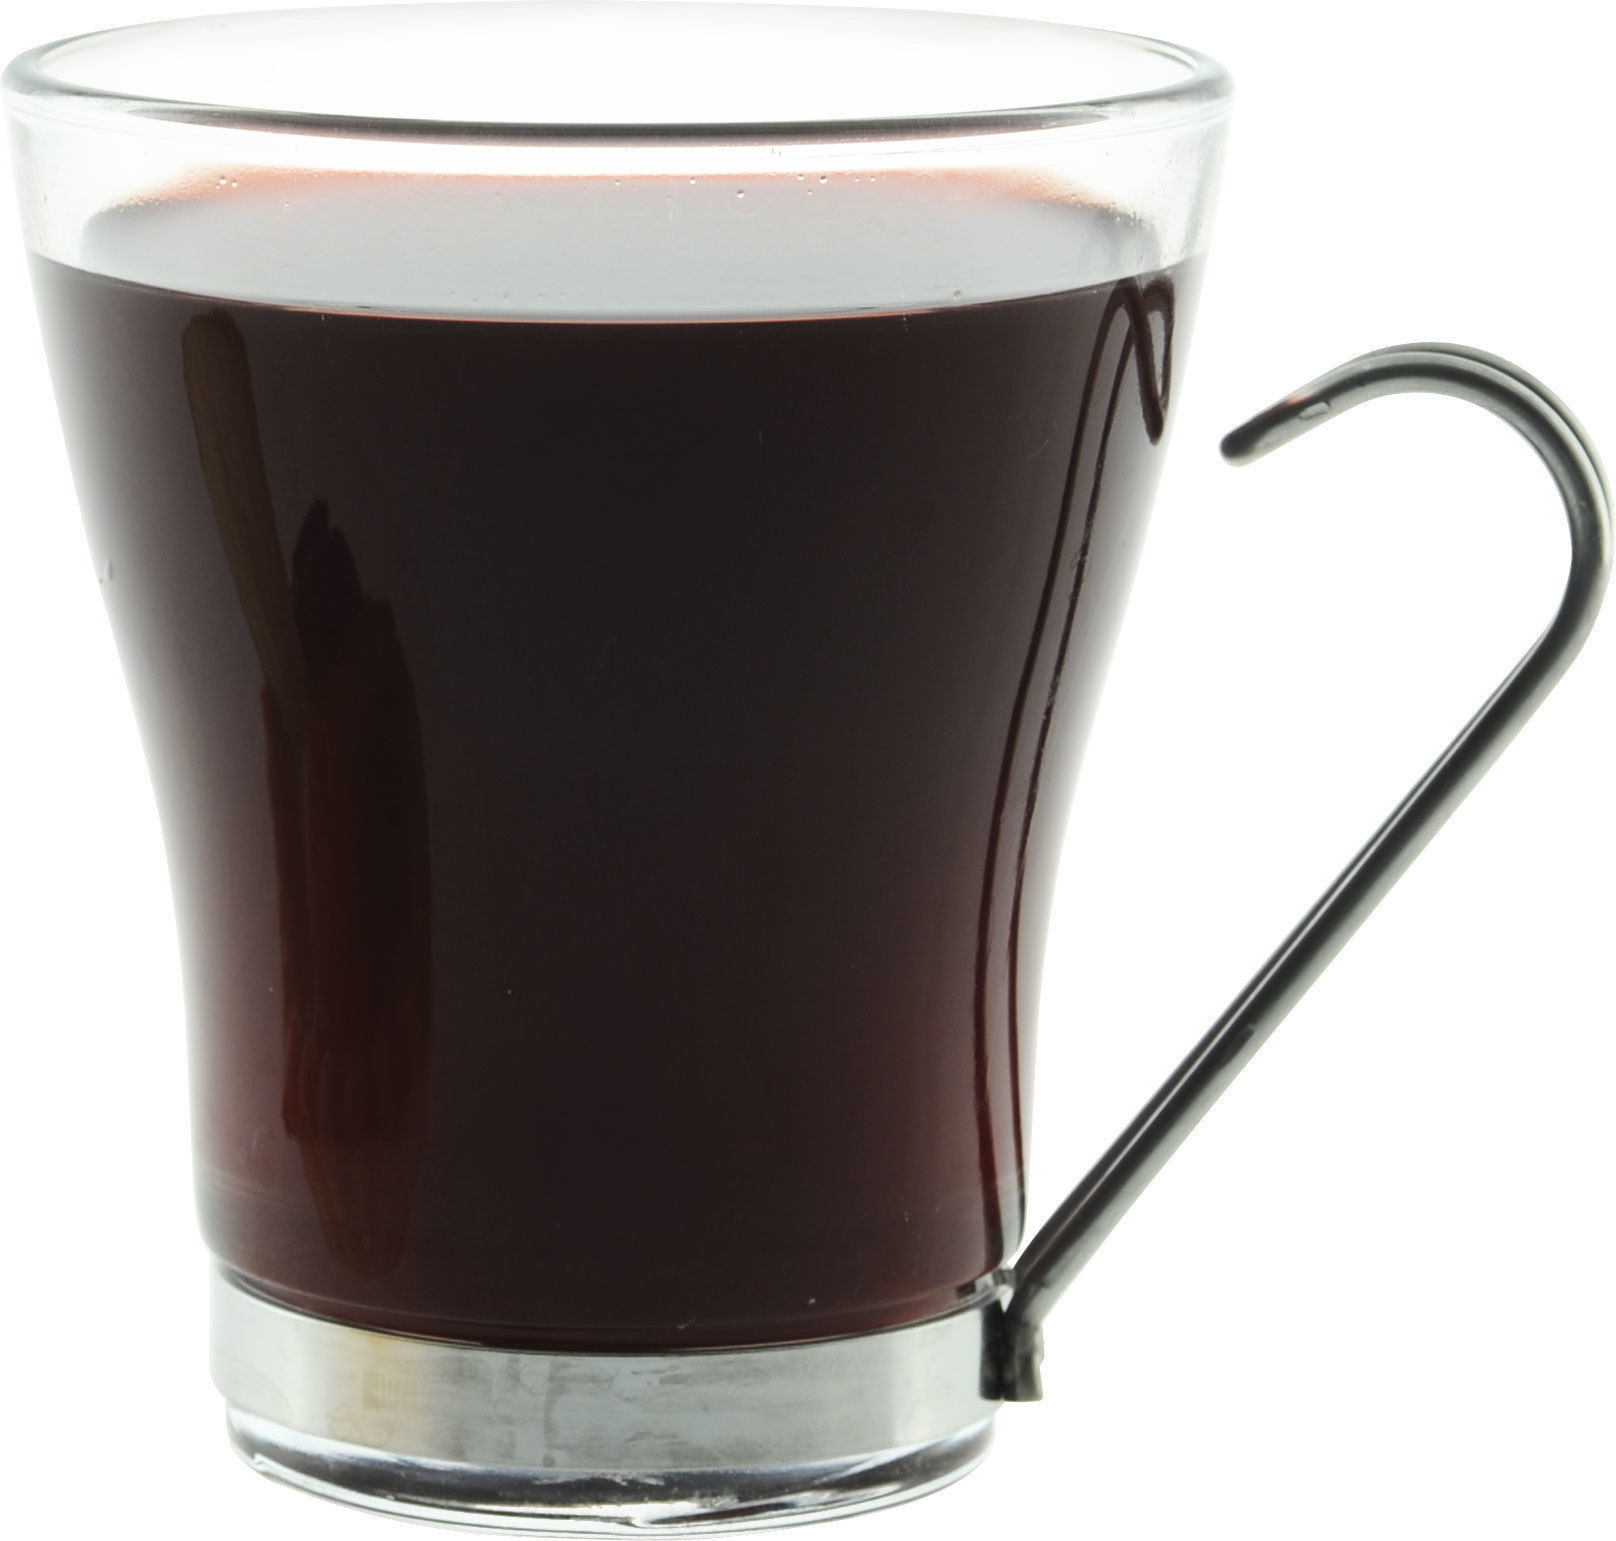 How to Make the Berry Mulled Wine